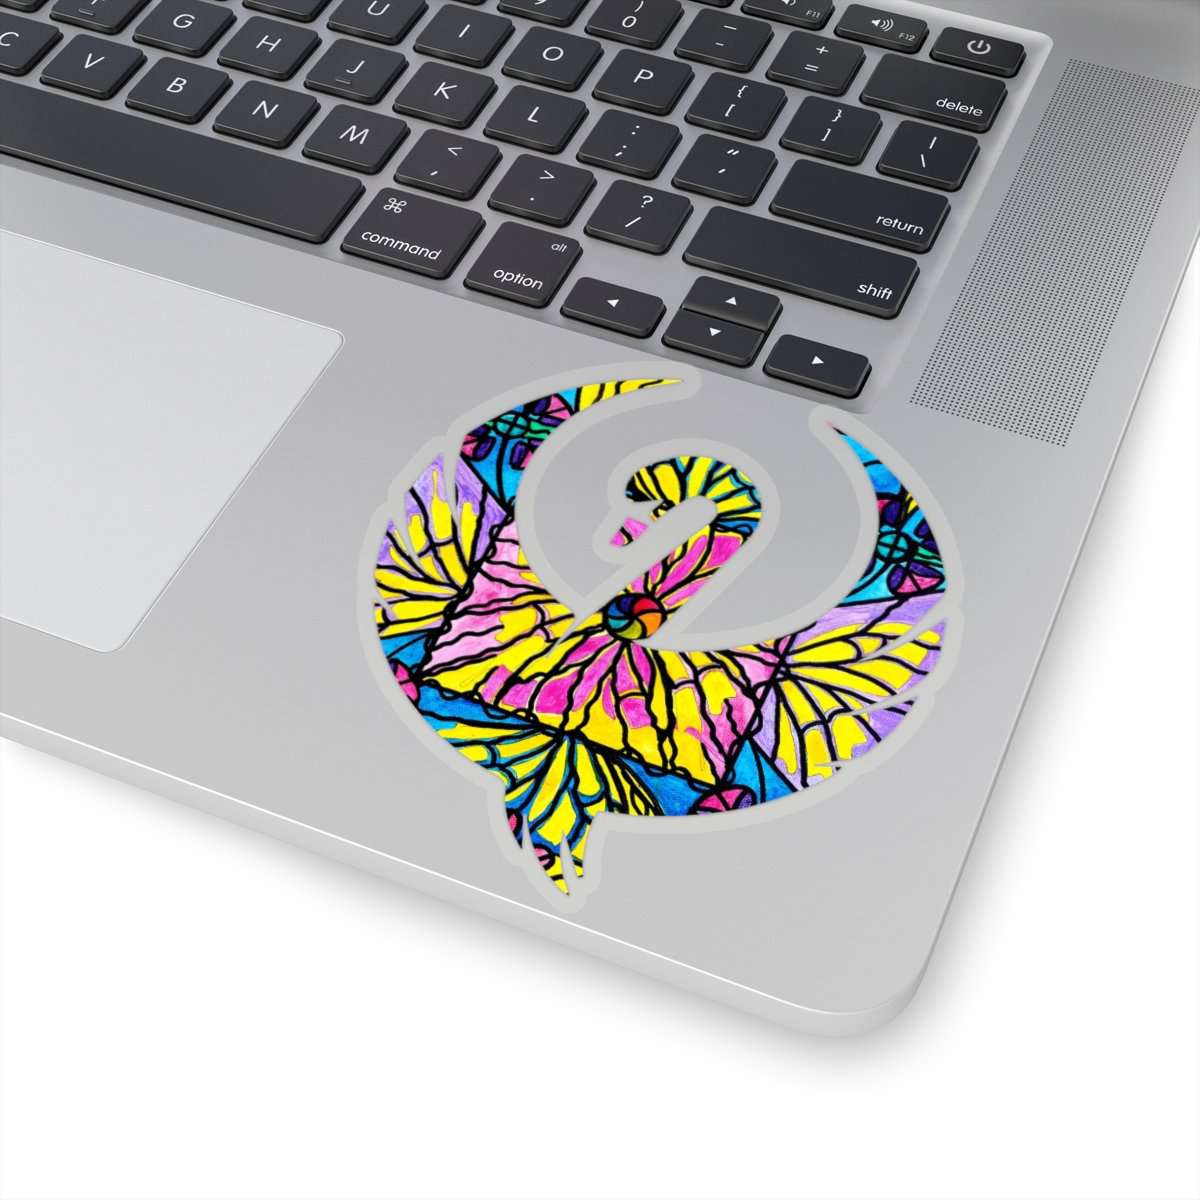 be-the-first-to-own-the-newest-beltane-swan-stickers-hot-on-sale_9.jpg